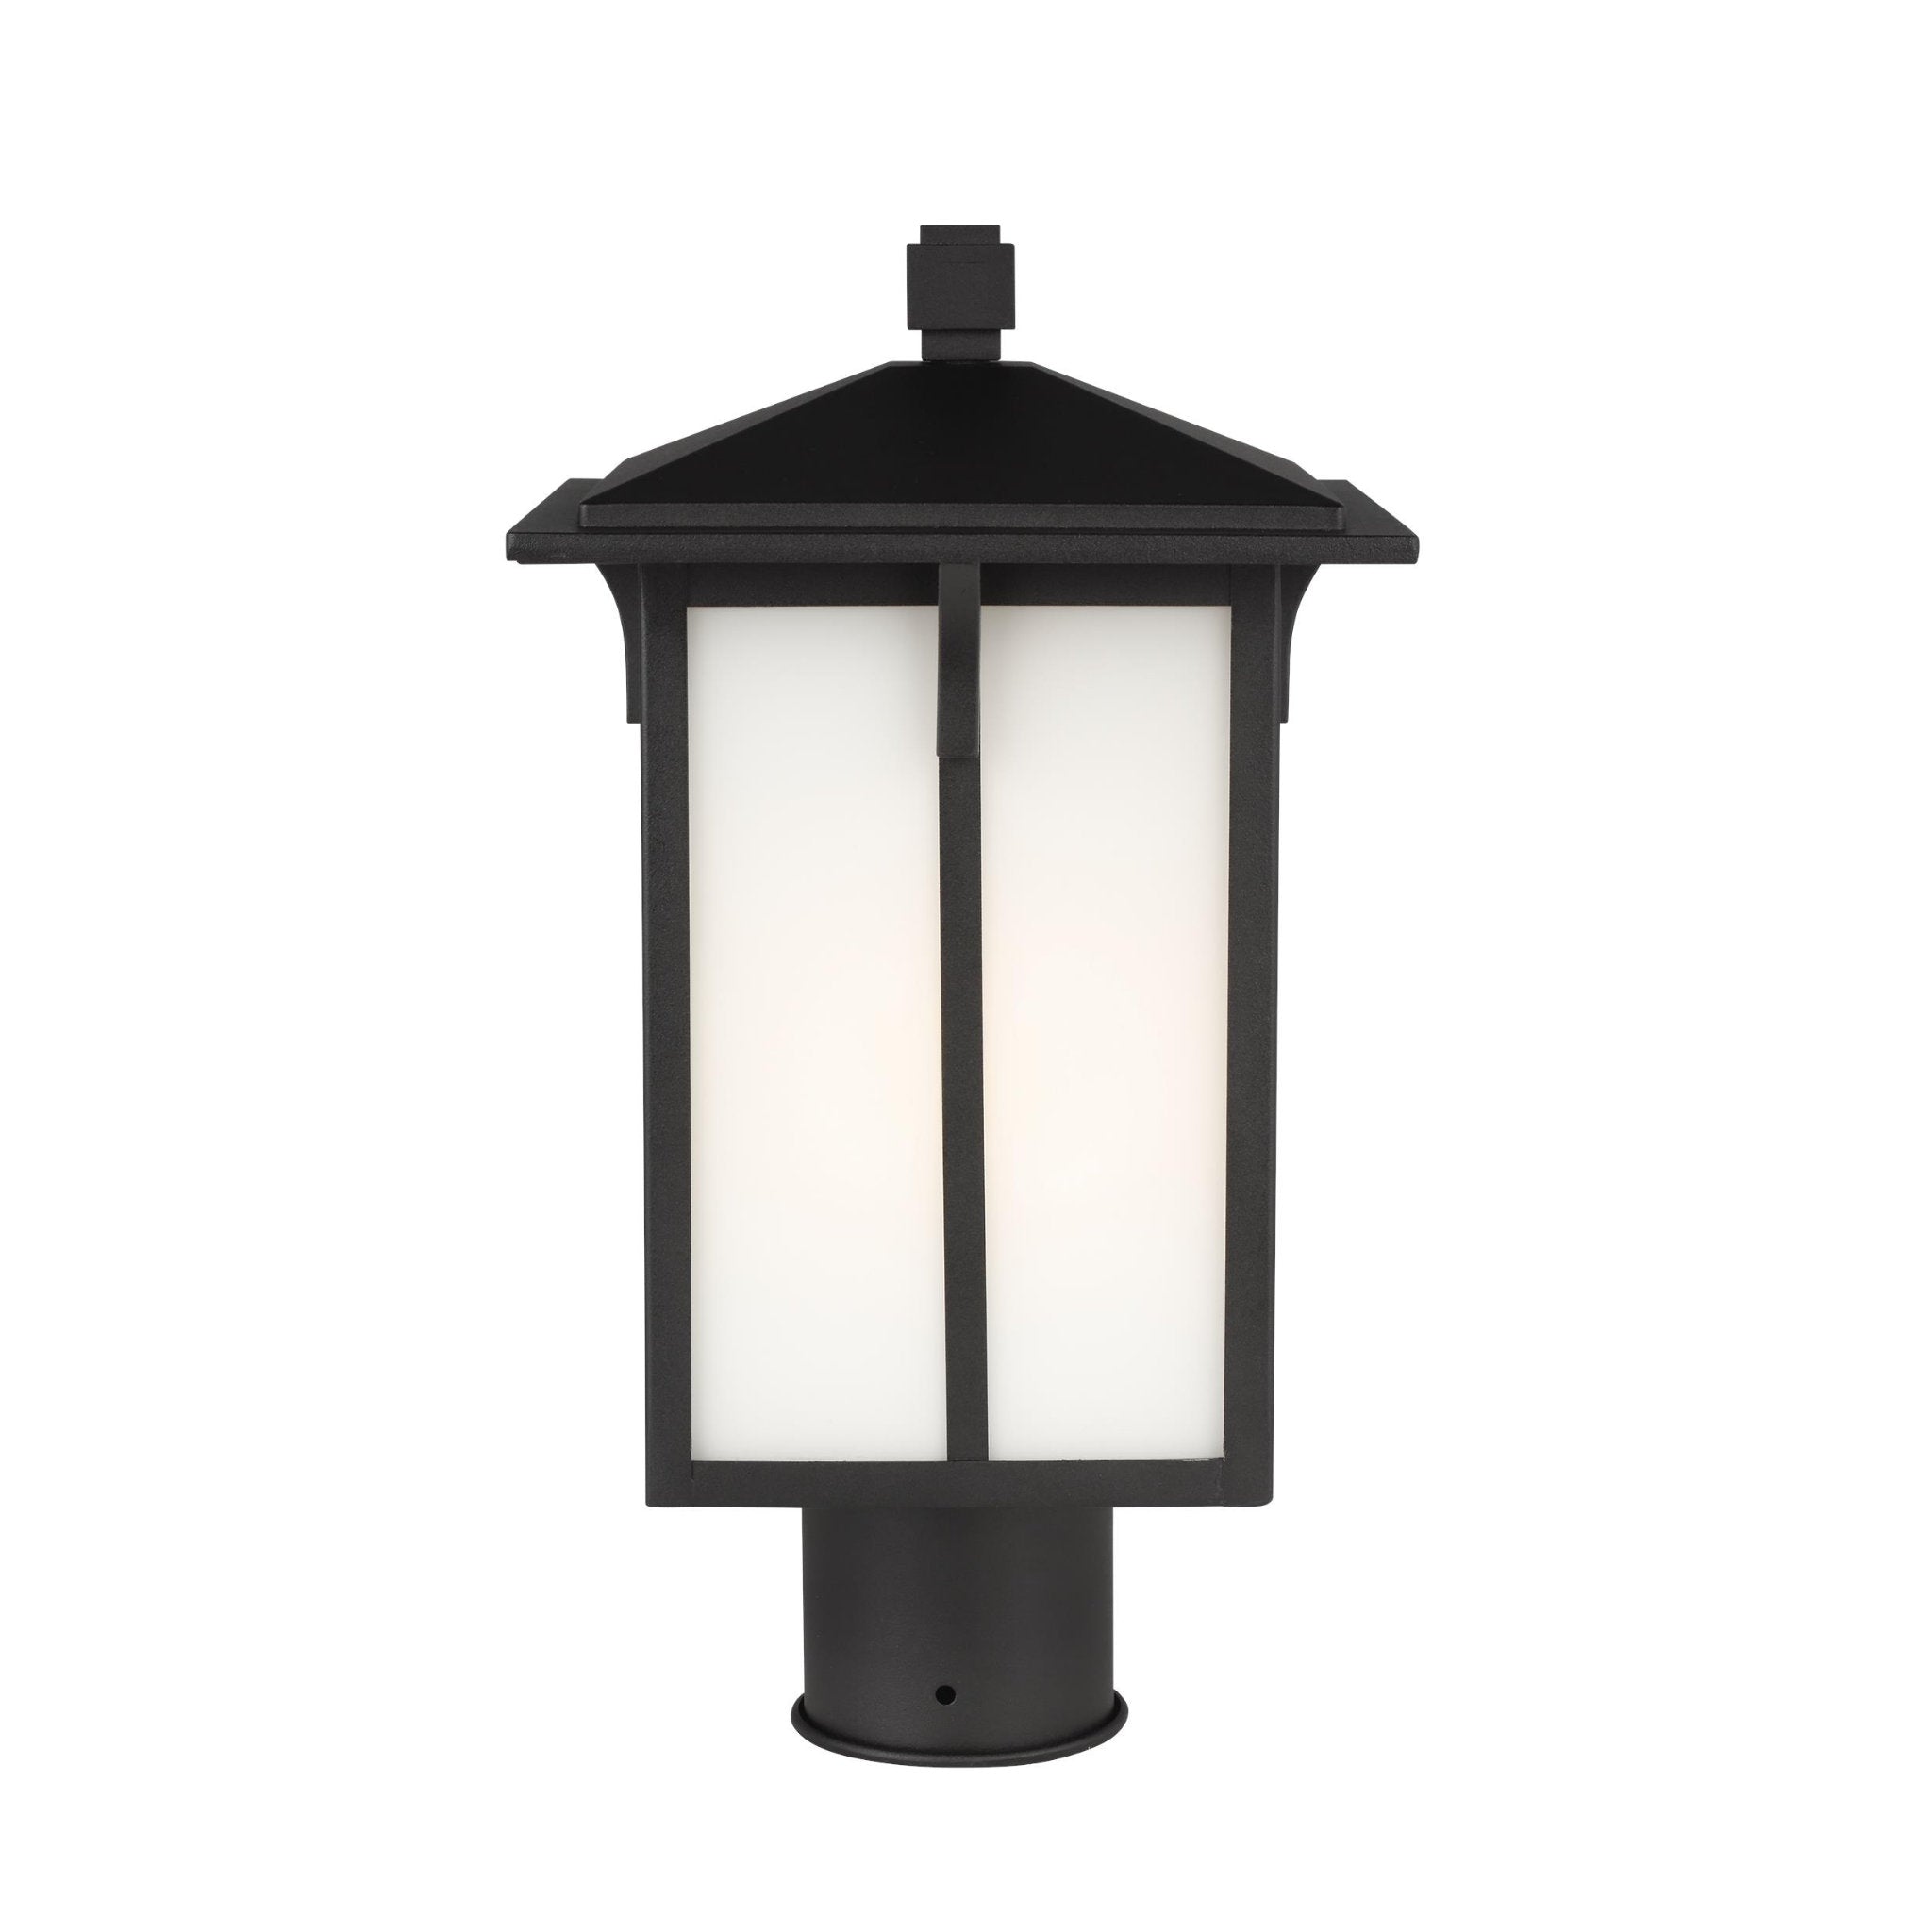 Tomek One Light Outdoor Post Lantern Transitional Fixture 8.375" Width 15.375" Height Aluminum Rectangular Etched / White Inside Shade in Black